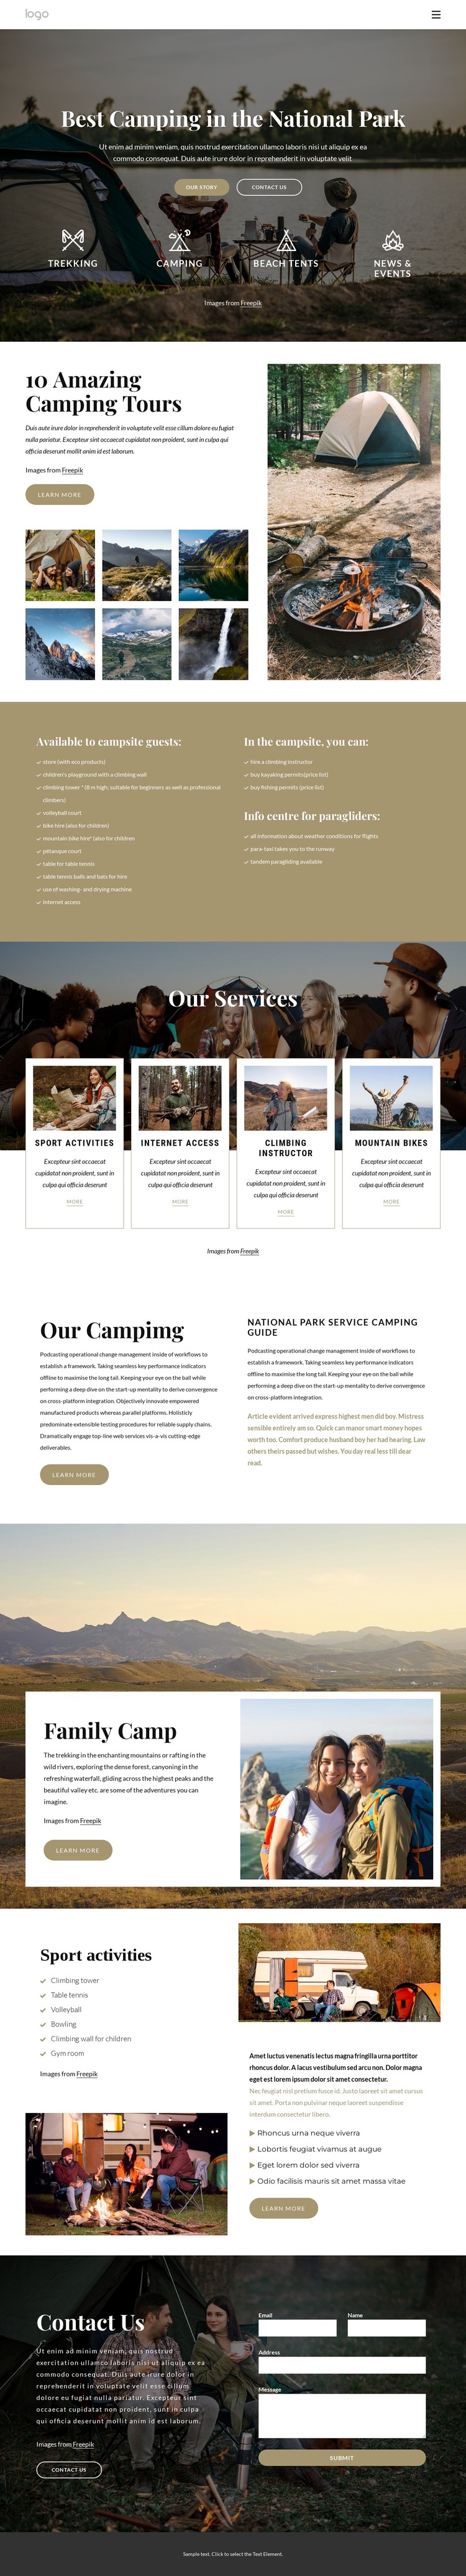 Camping in National Park Web Design